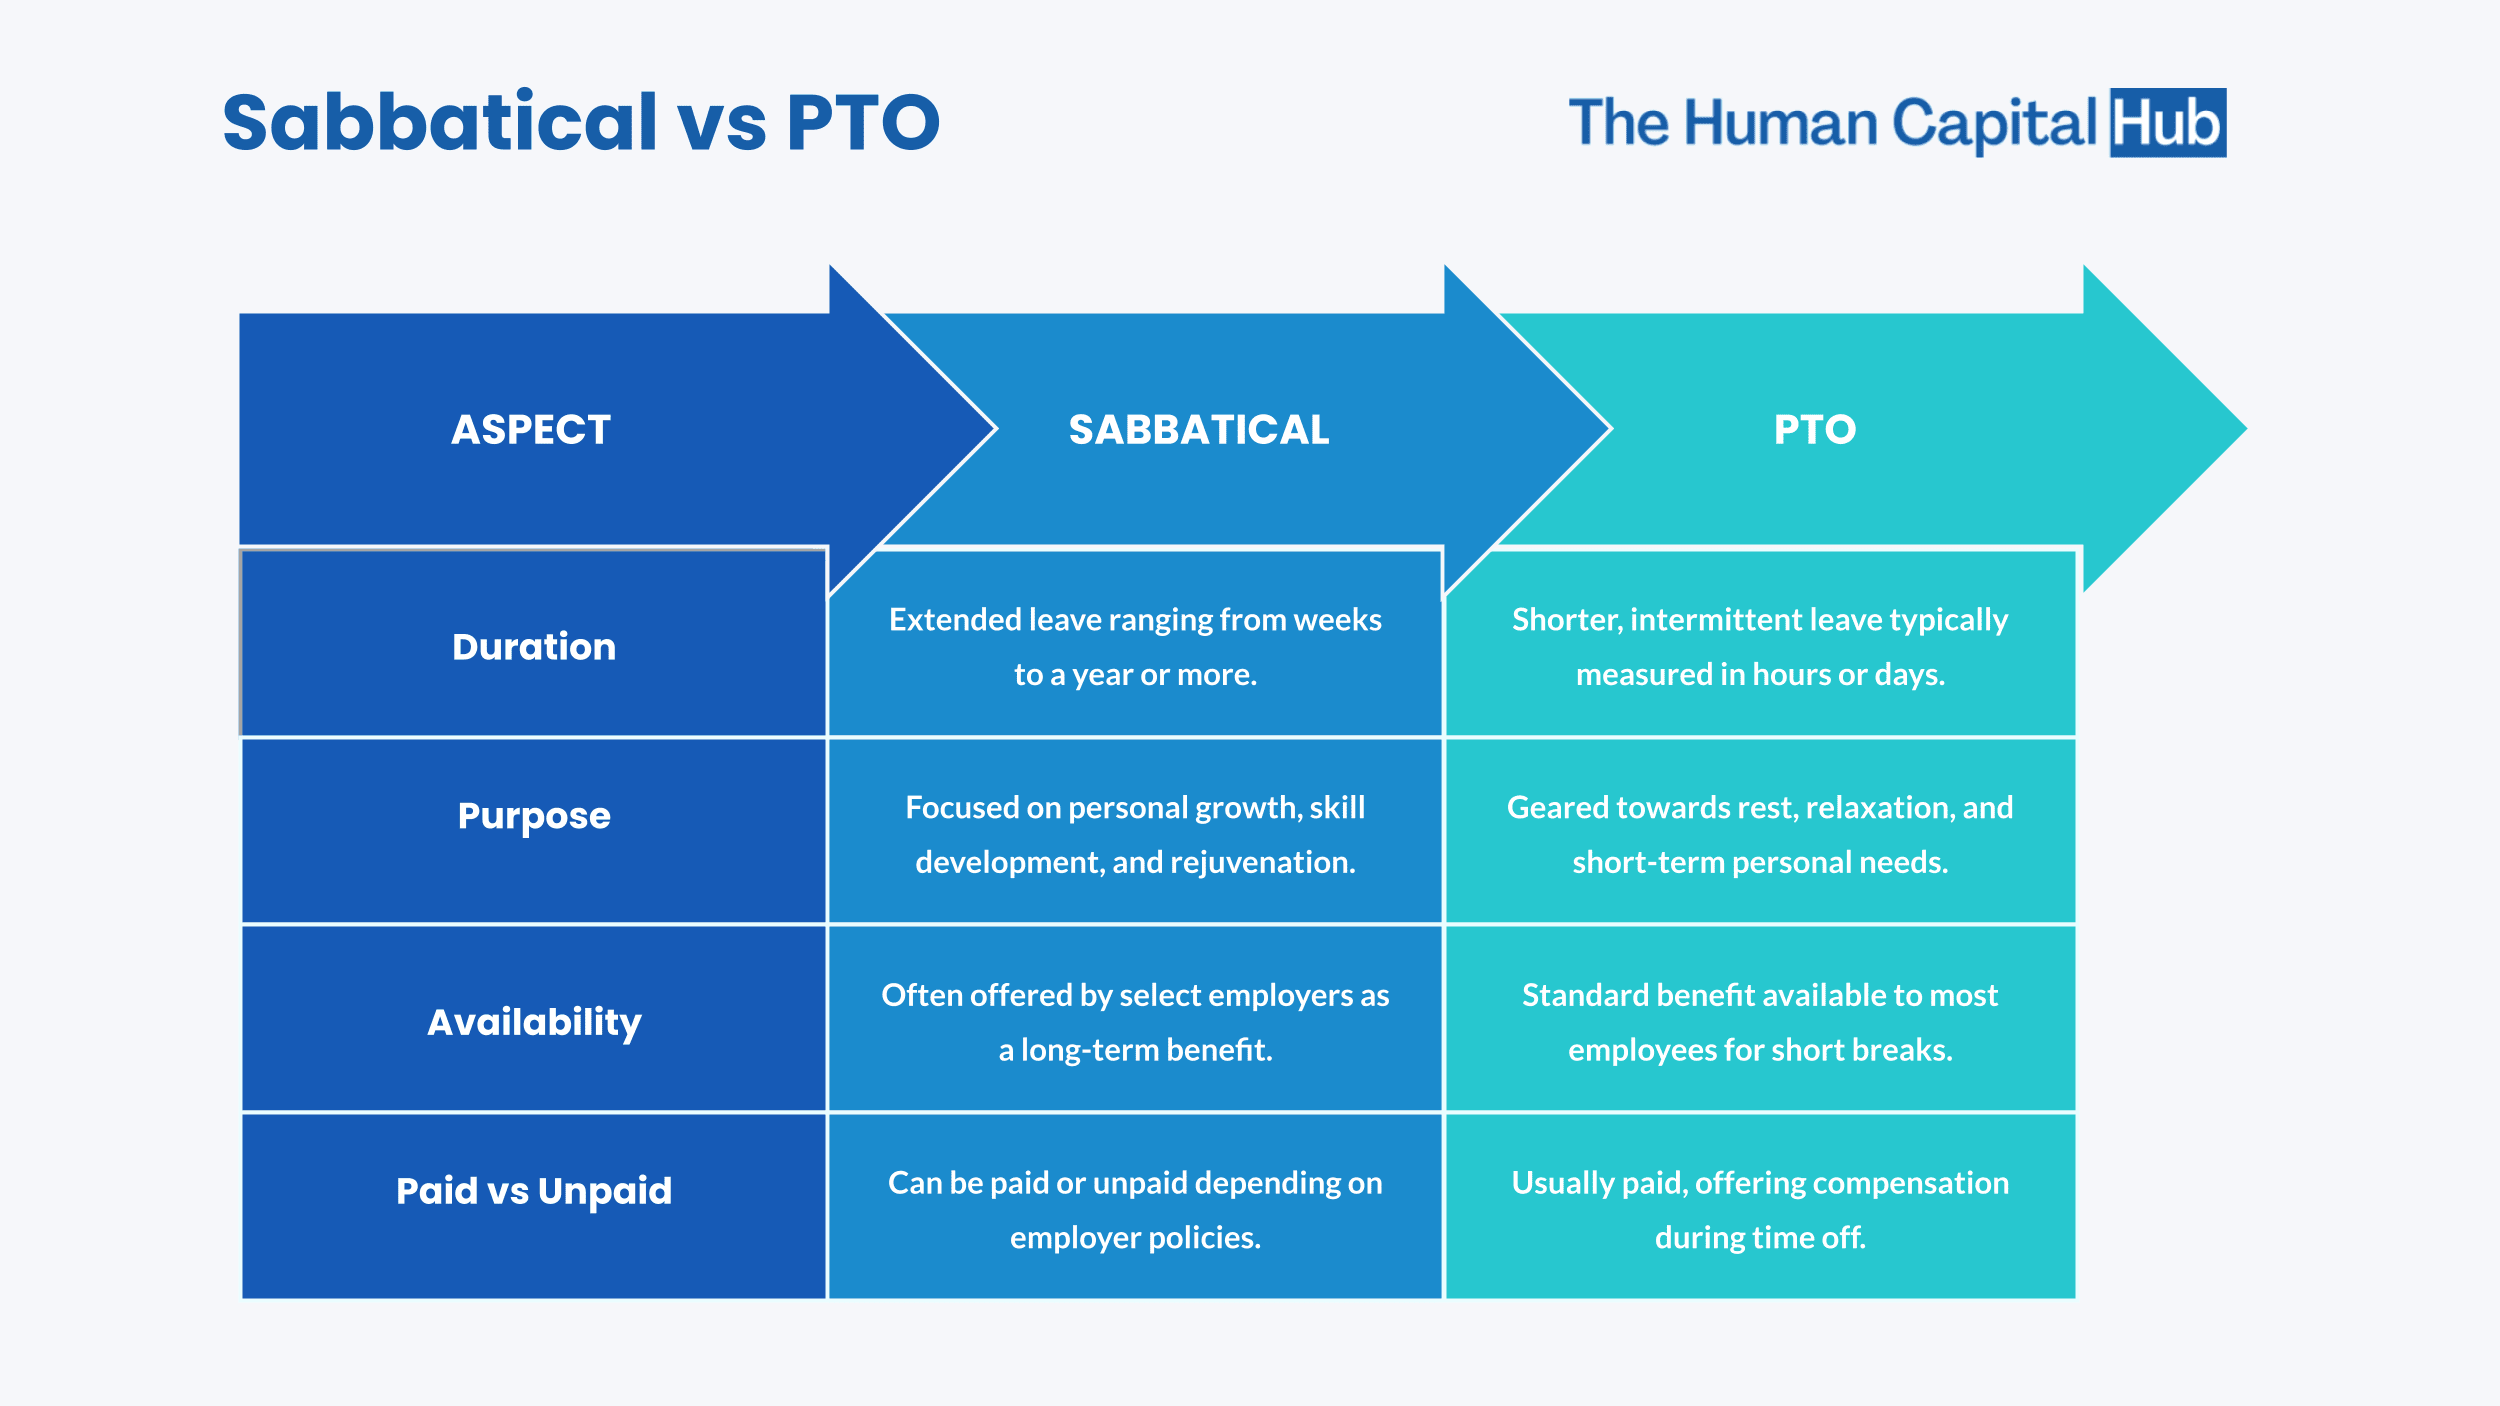 What is Sabbatical vs PTO